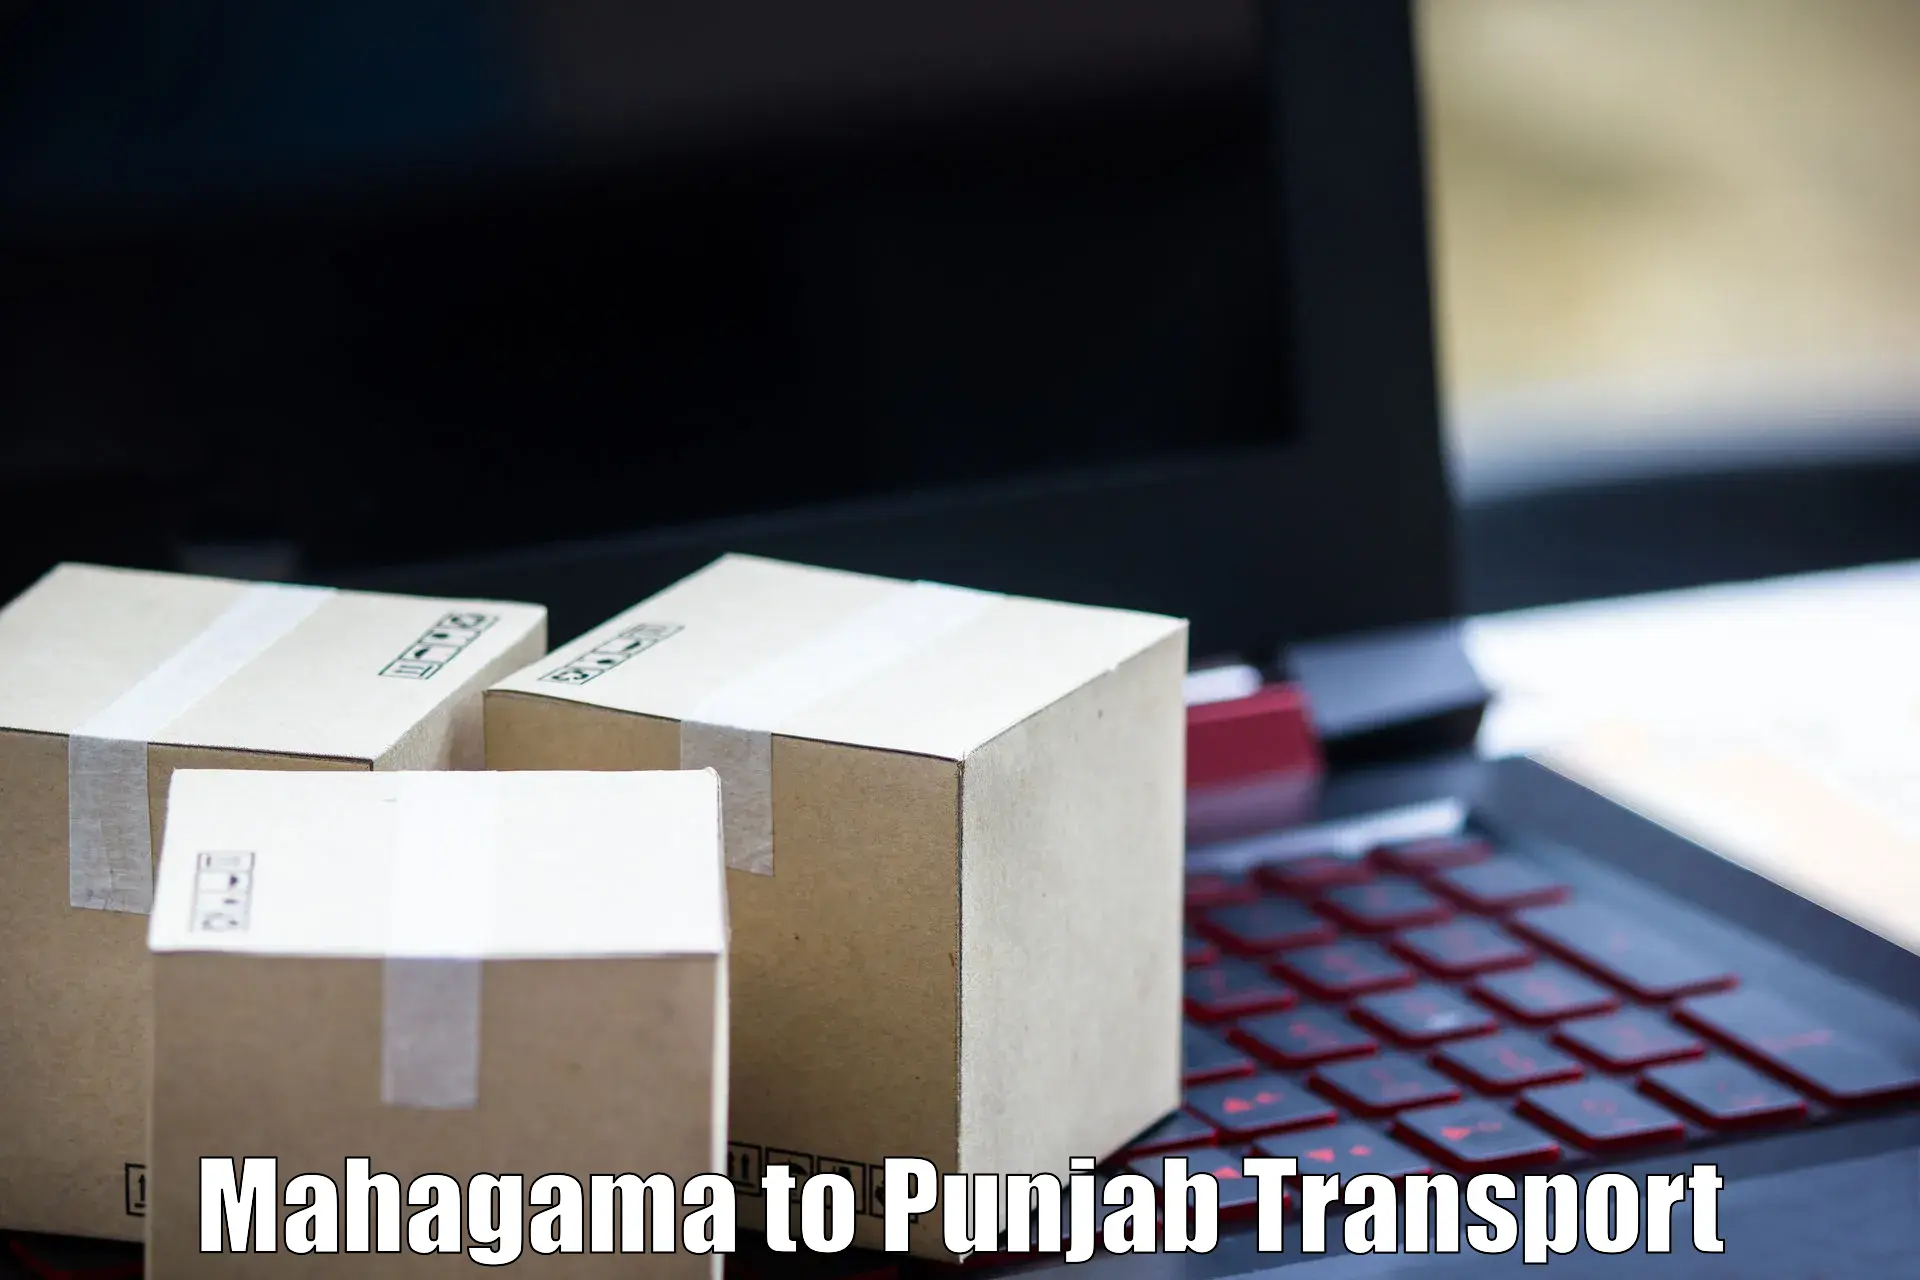 Transport bike from one state to another Mahagama to Faridkot